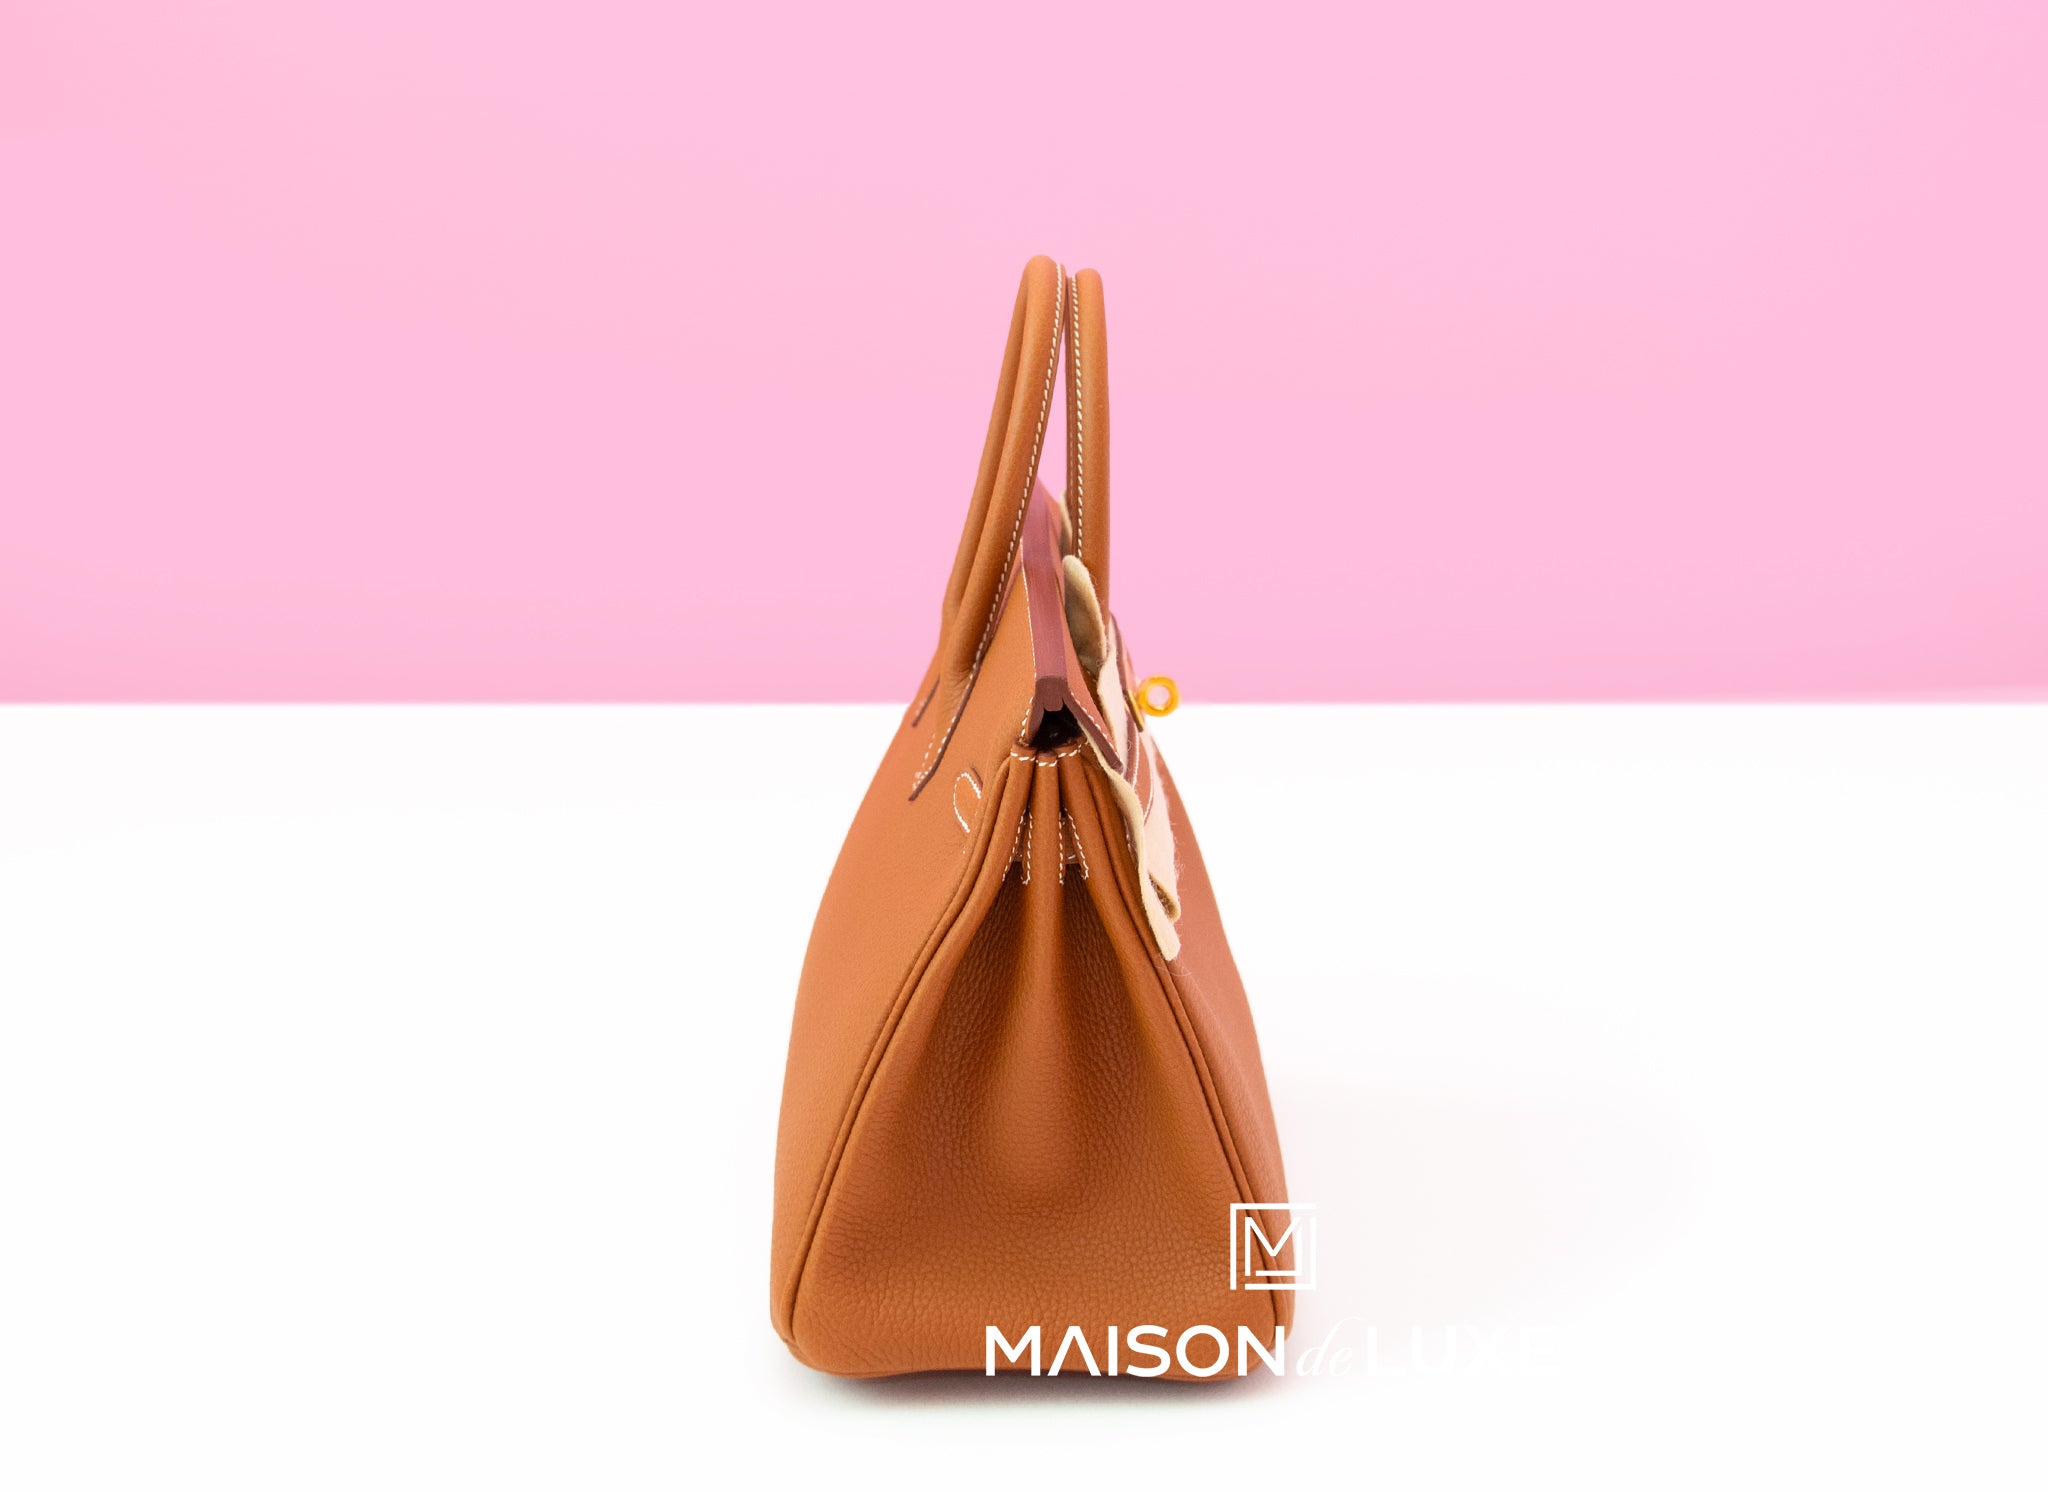 8 Great Bags by Deux Lux